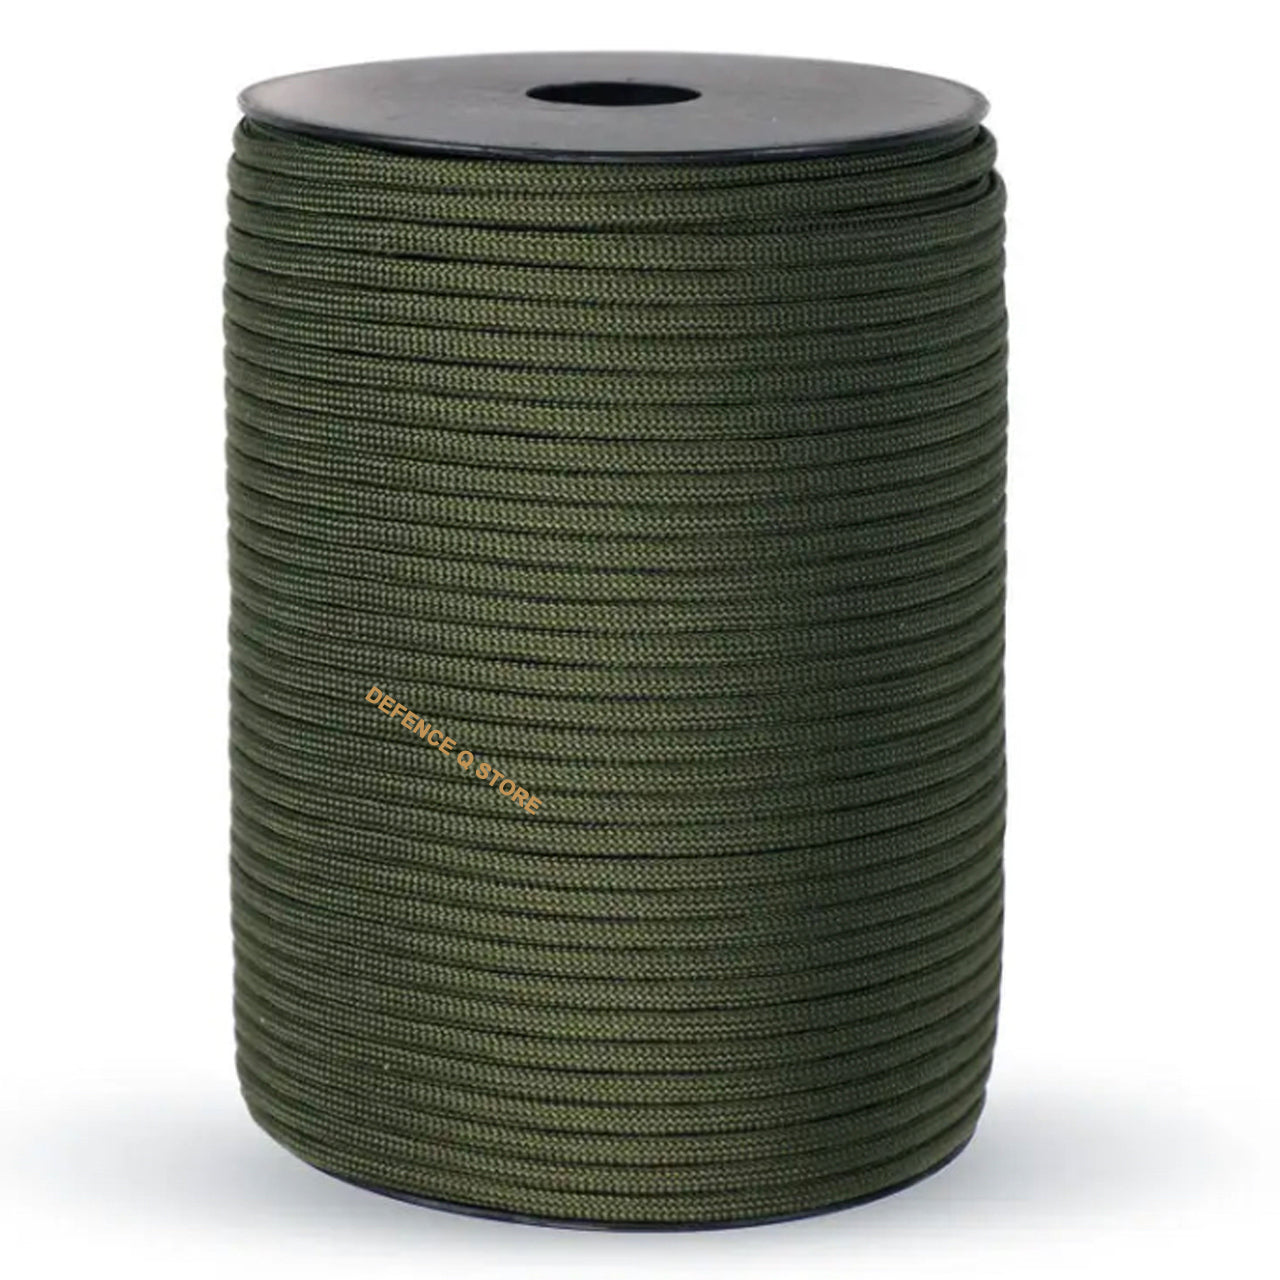 This high-quality 100M Paracord Roll in OD Green boasts a 9 strand inner cord made of strong and durable nylon. With a diameter of 4mm and a breaking strength of 550lb, this paracord is perfect for a variety of outdoor activities and survival situations. Please note, this product is not recommended for climbing purposes. www.defenceqstore.com.au